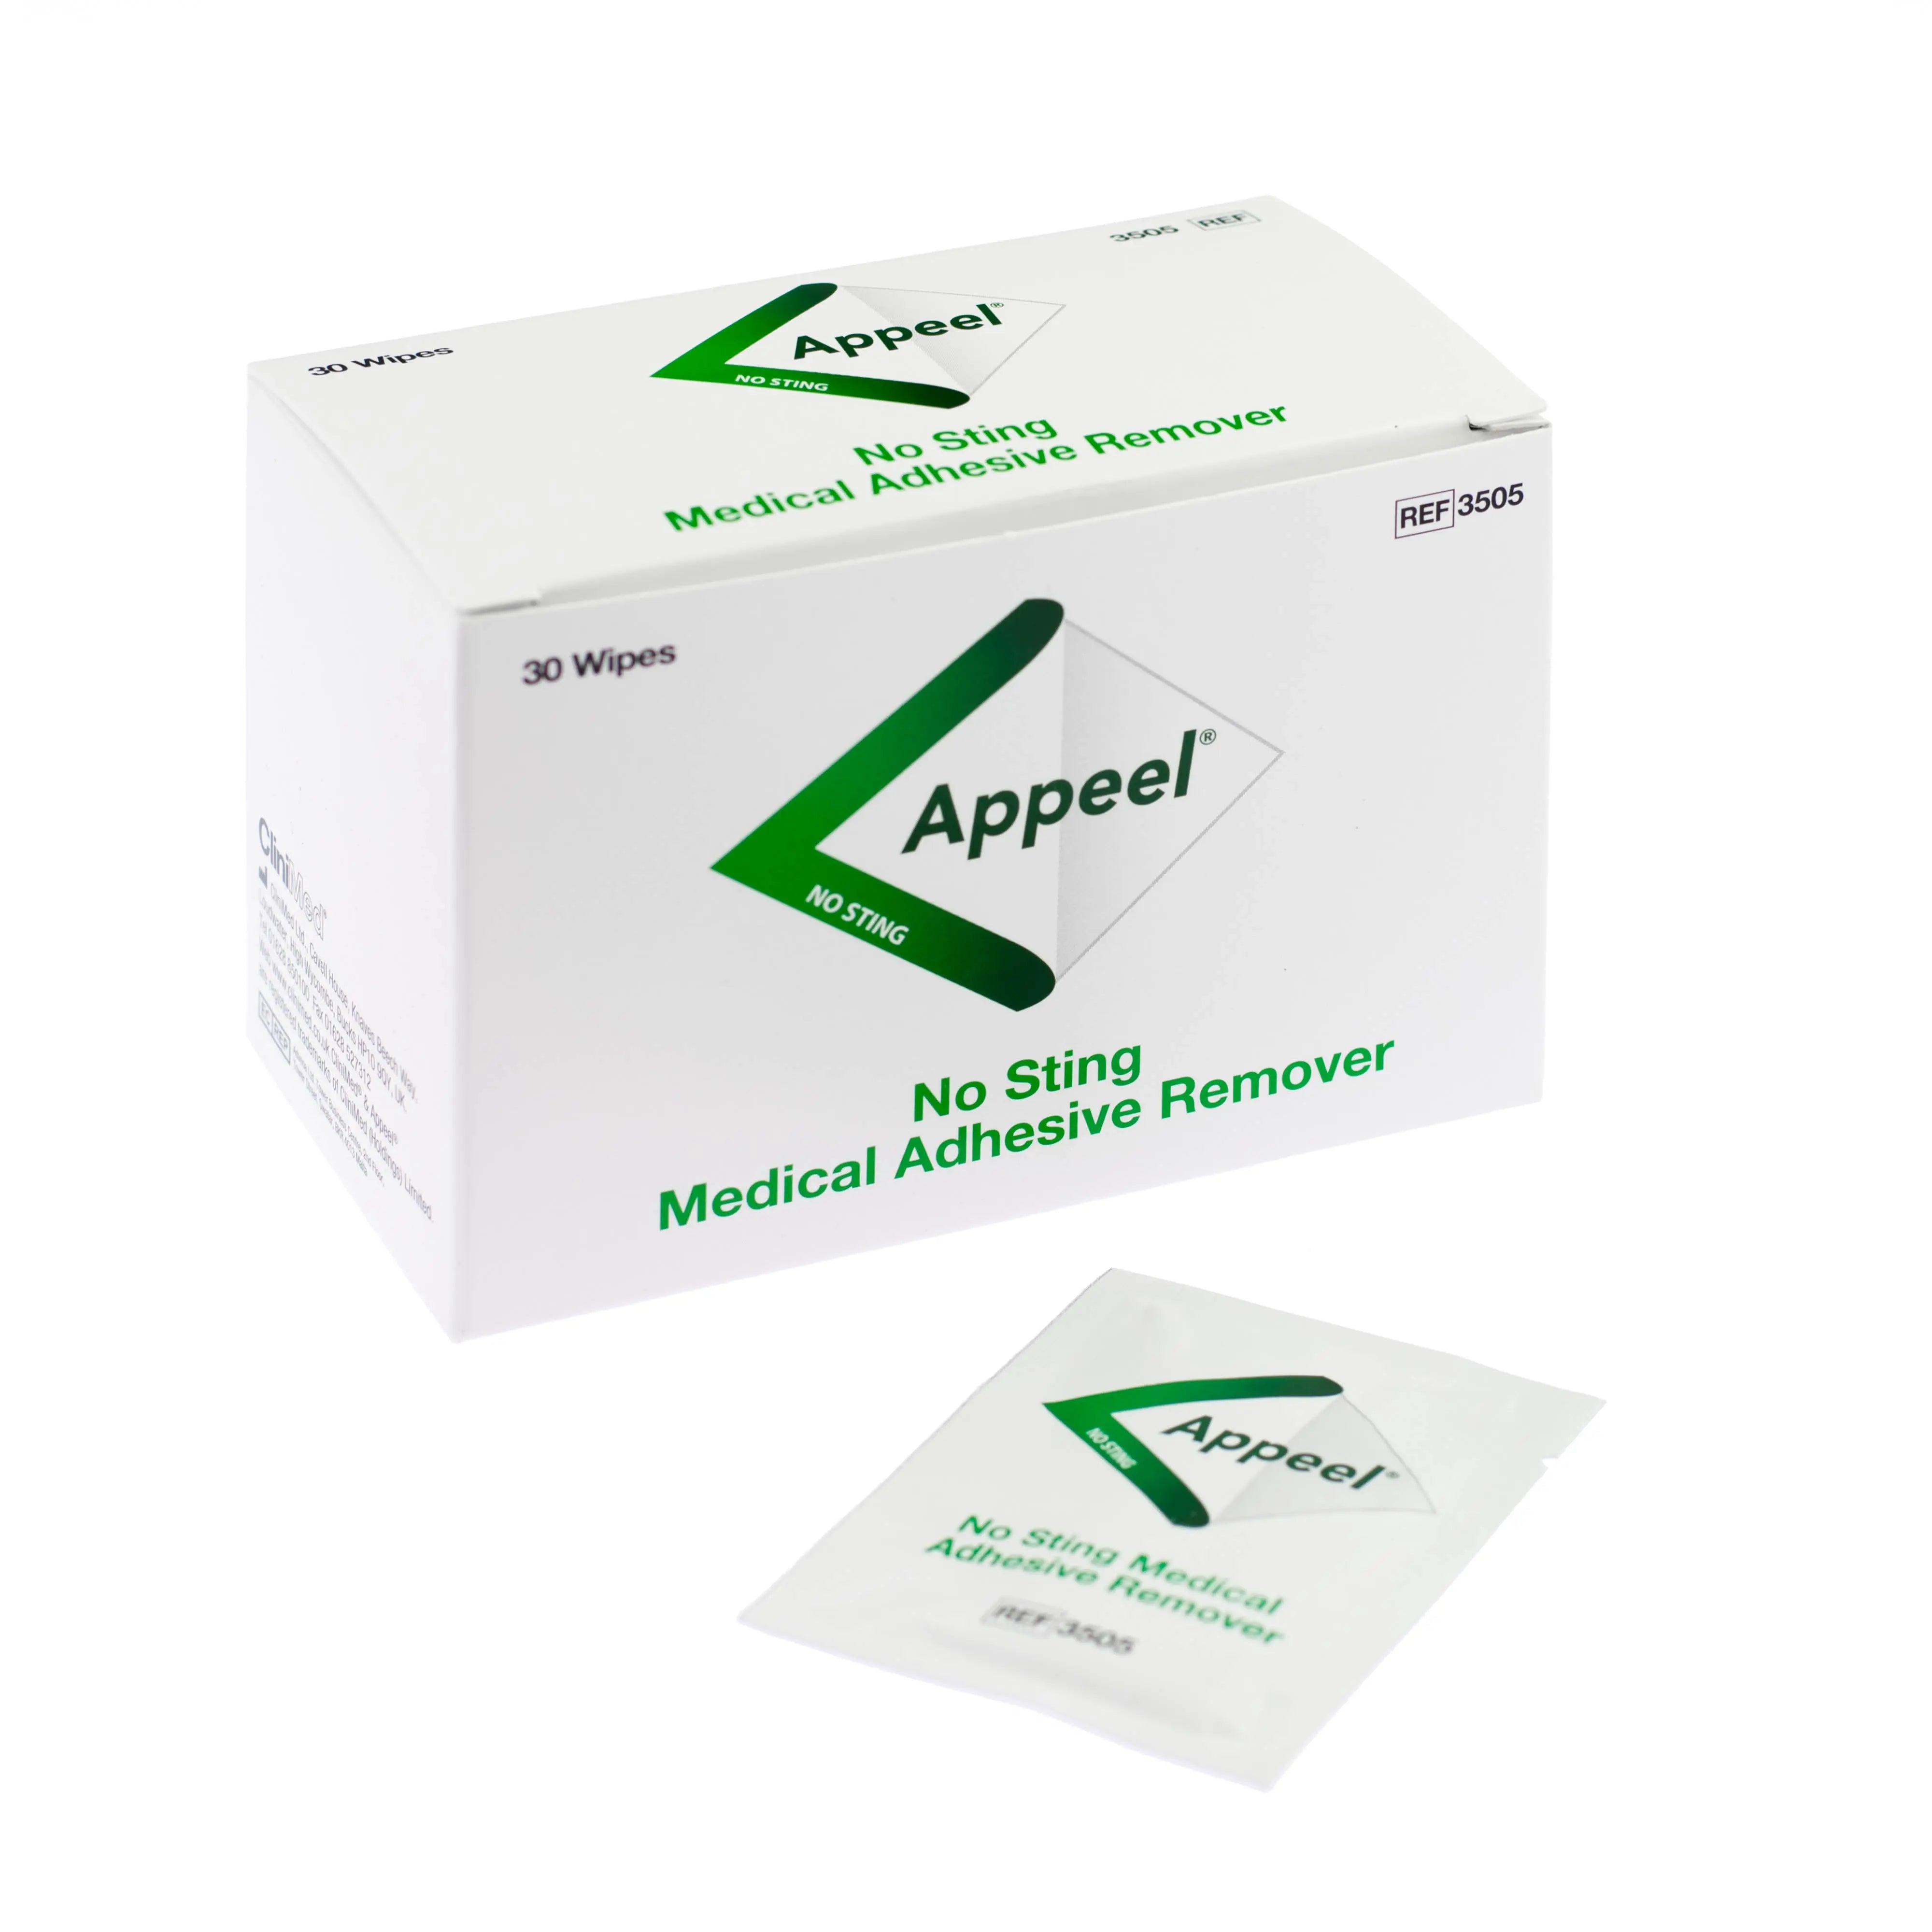 Appeel Sterile Medical Adhesive Remover, CliniMed Wound Care